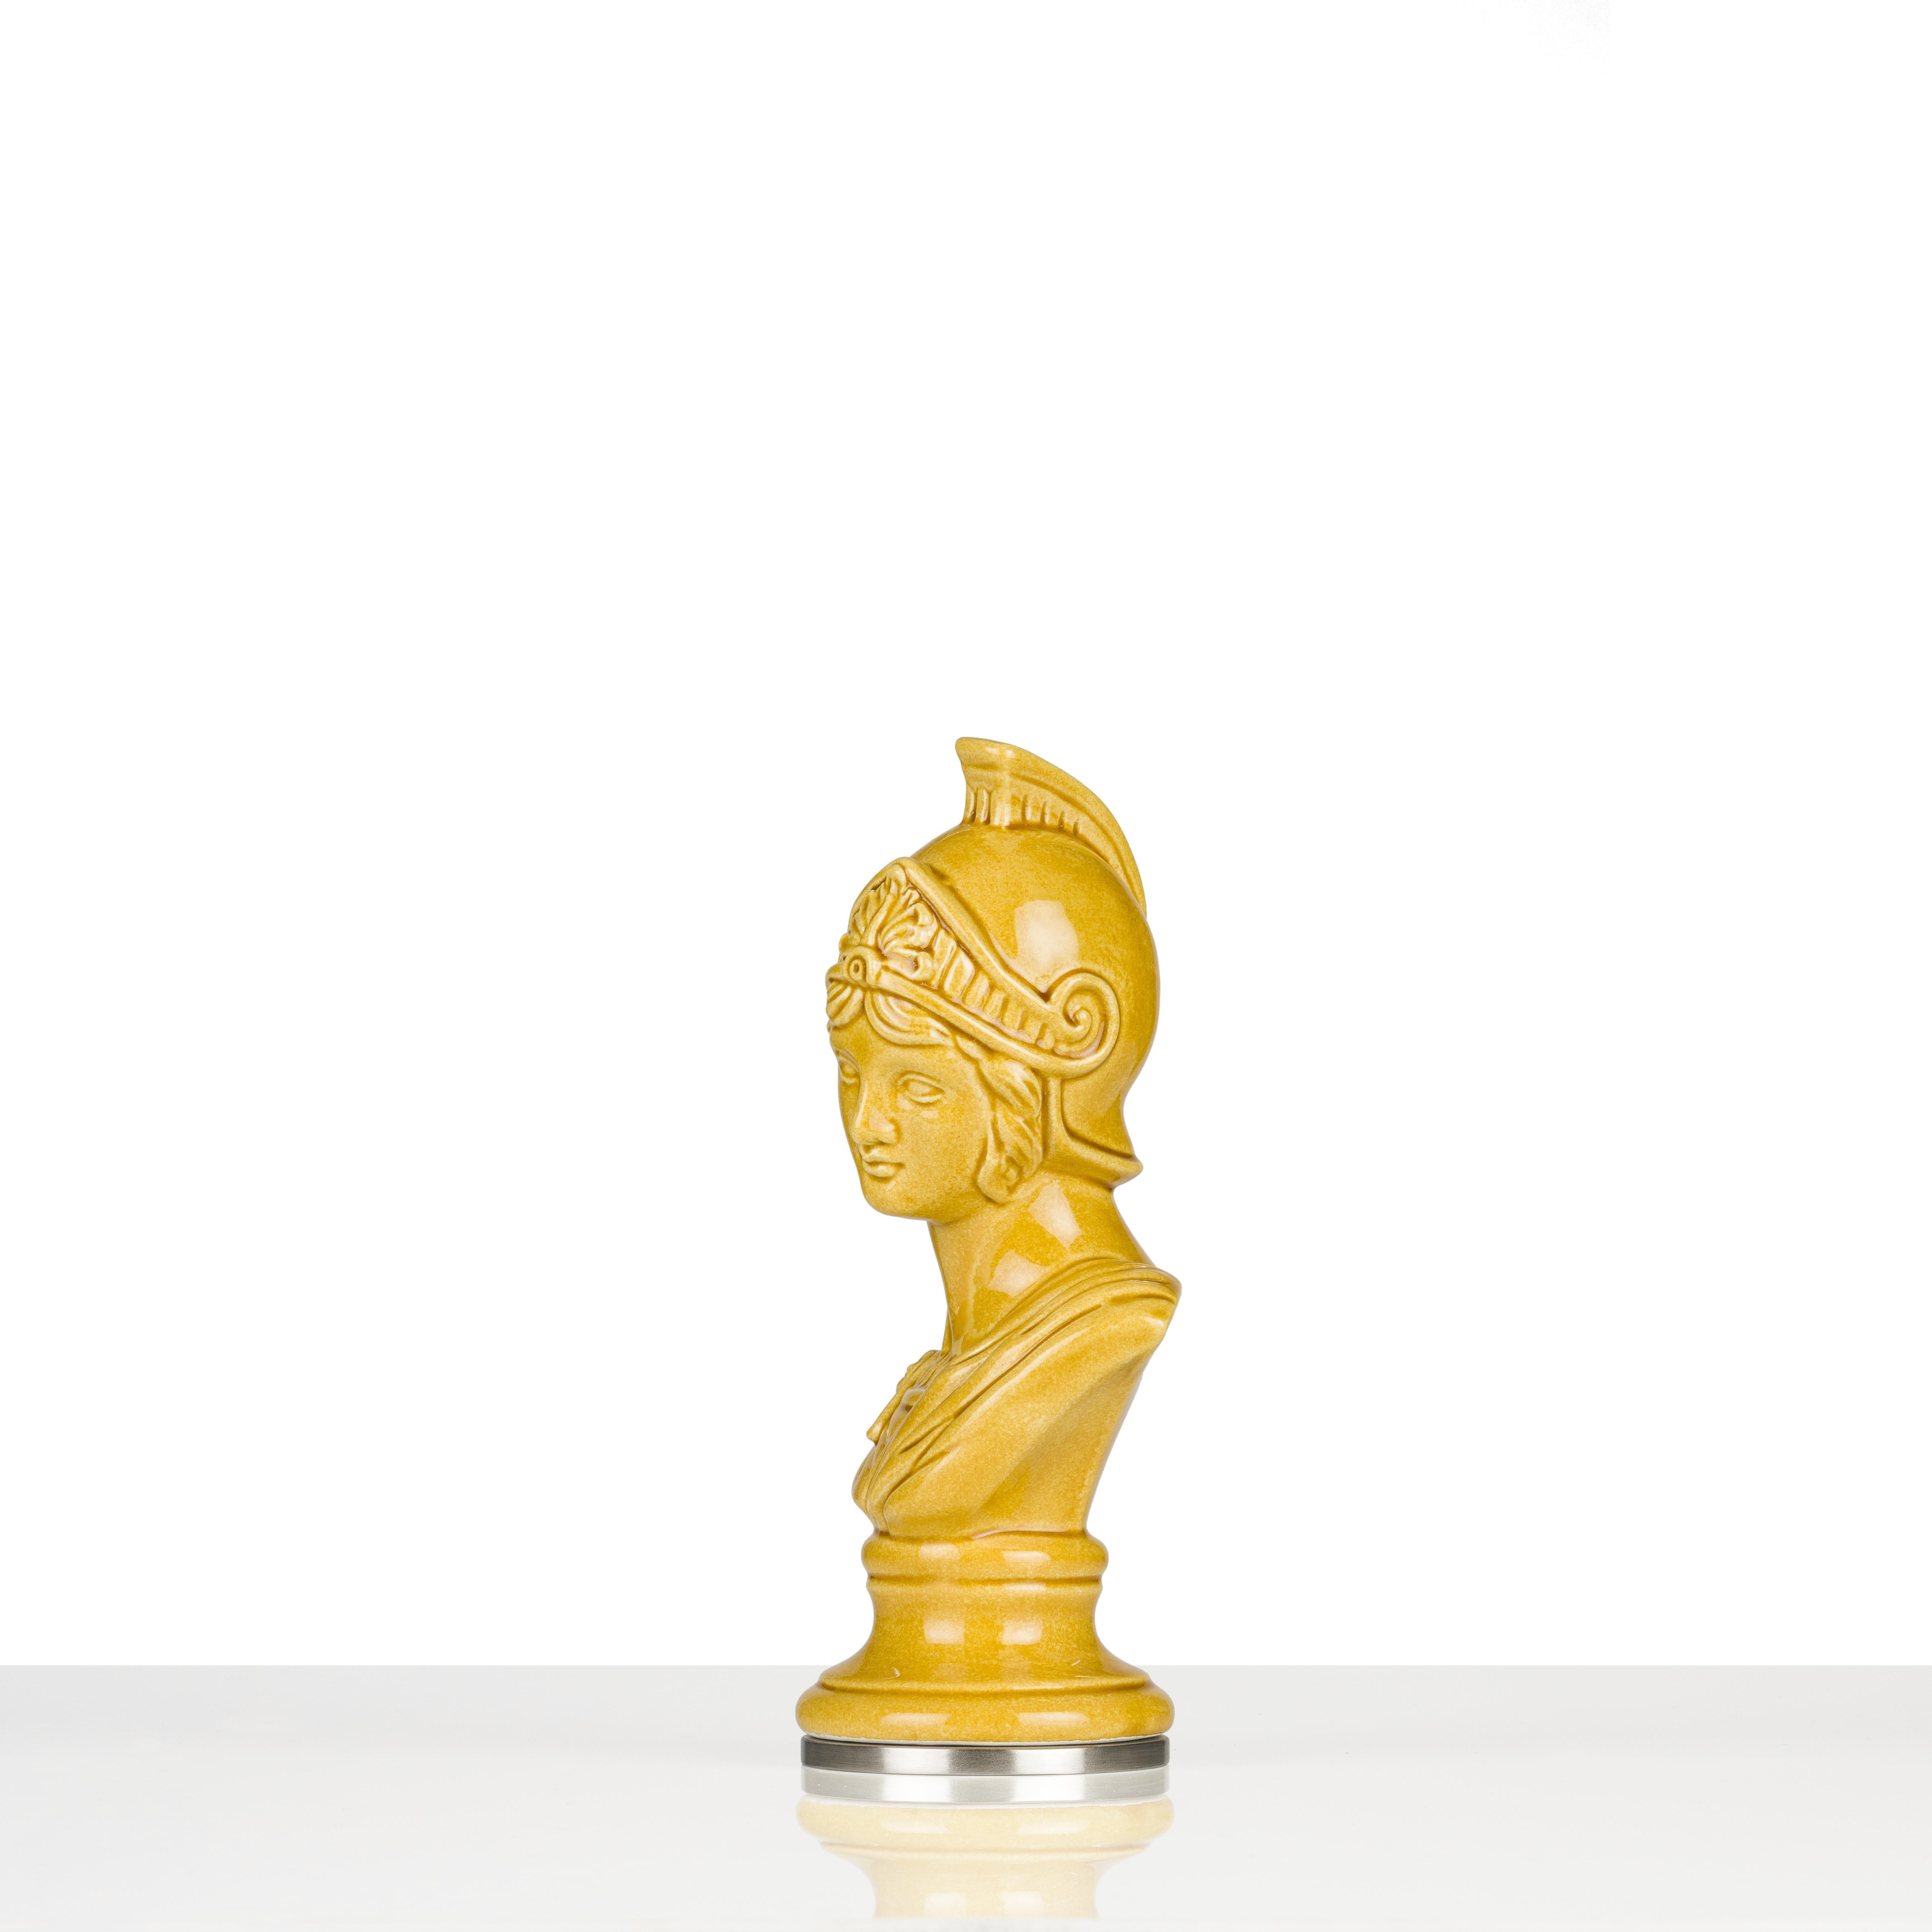 LF- The Luck of the Gods
A desk-companion, an ornament, a muse, a book-end, a talisman... LF's ancient deities are a friendly lot, ready to bring a whimsical touch of the Classics into your life. With fine ceramic from the Venetian area, traditional